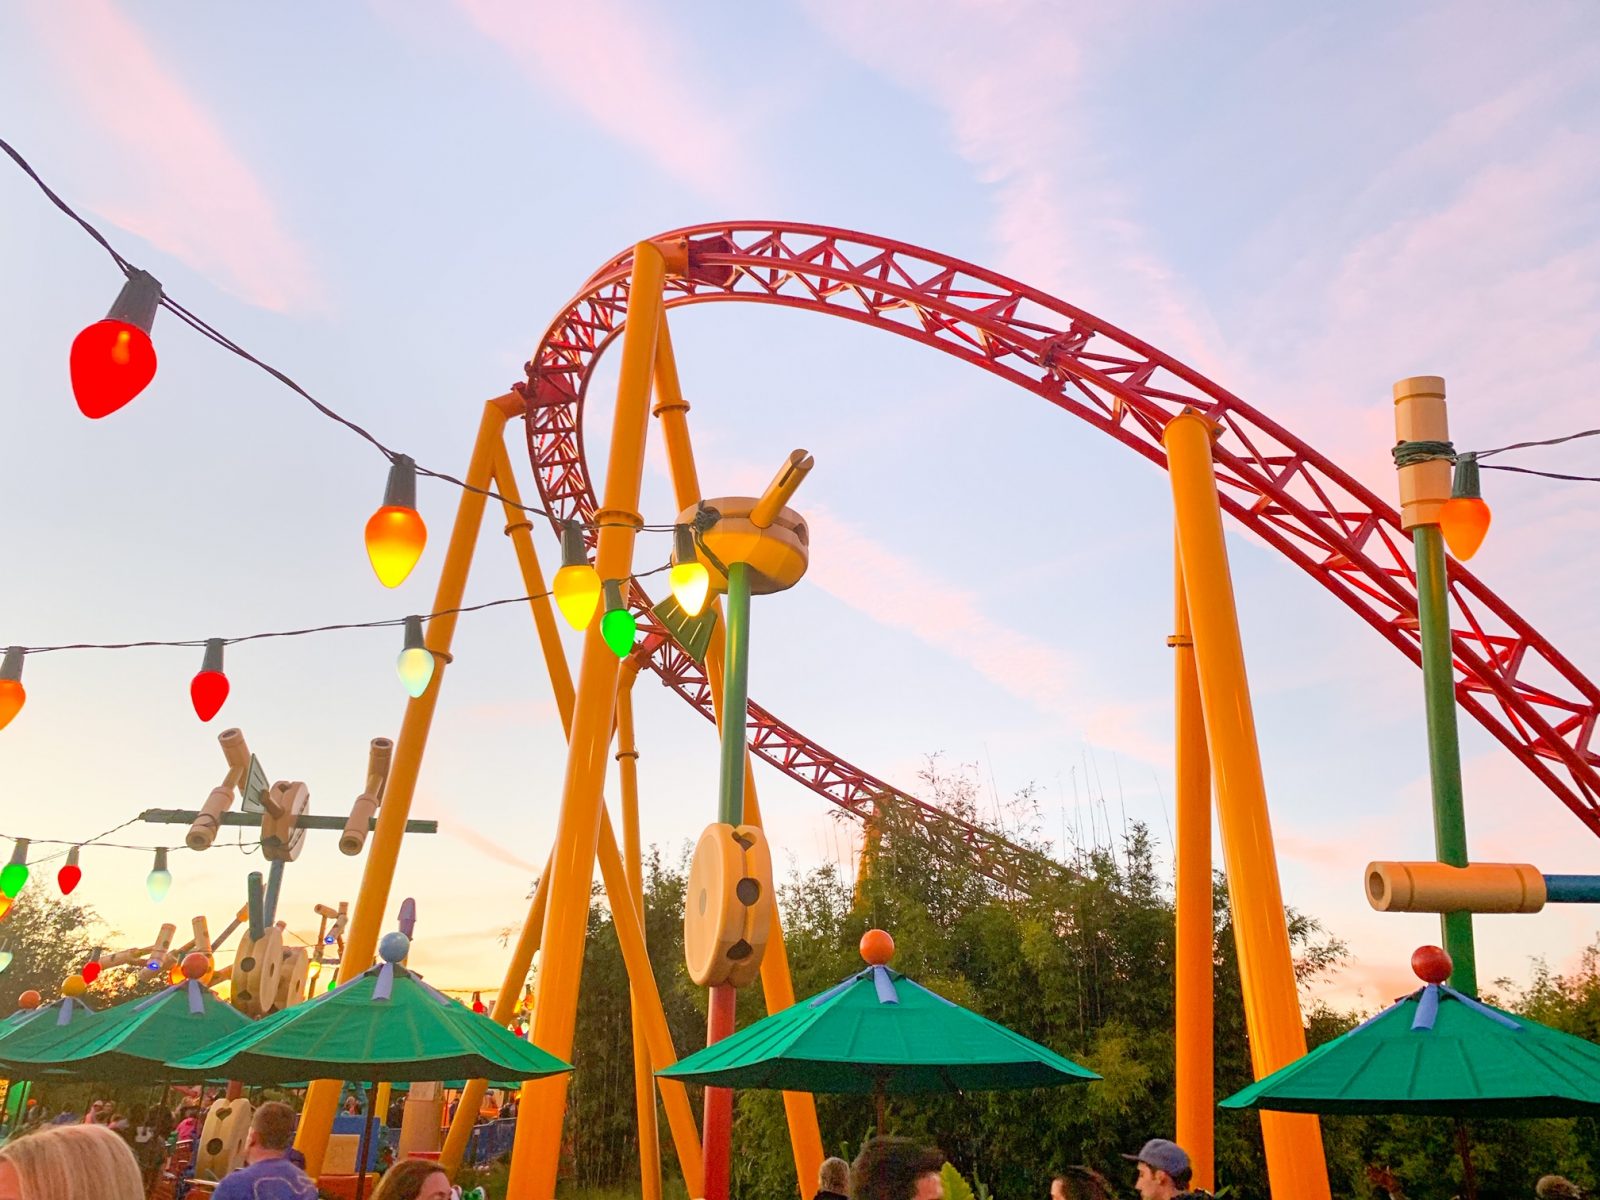 The Slinky Dog ride - one where you can use the Disney rider switch